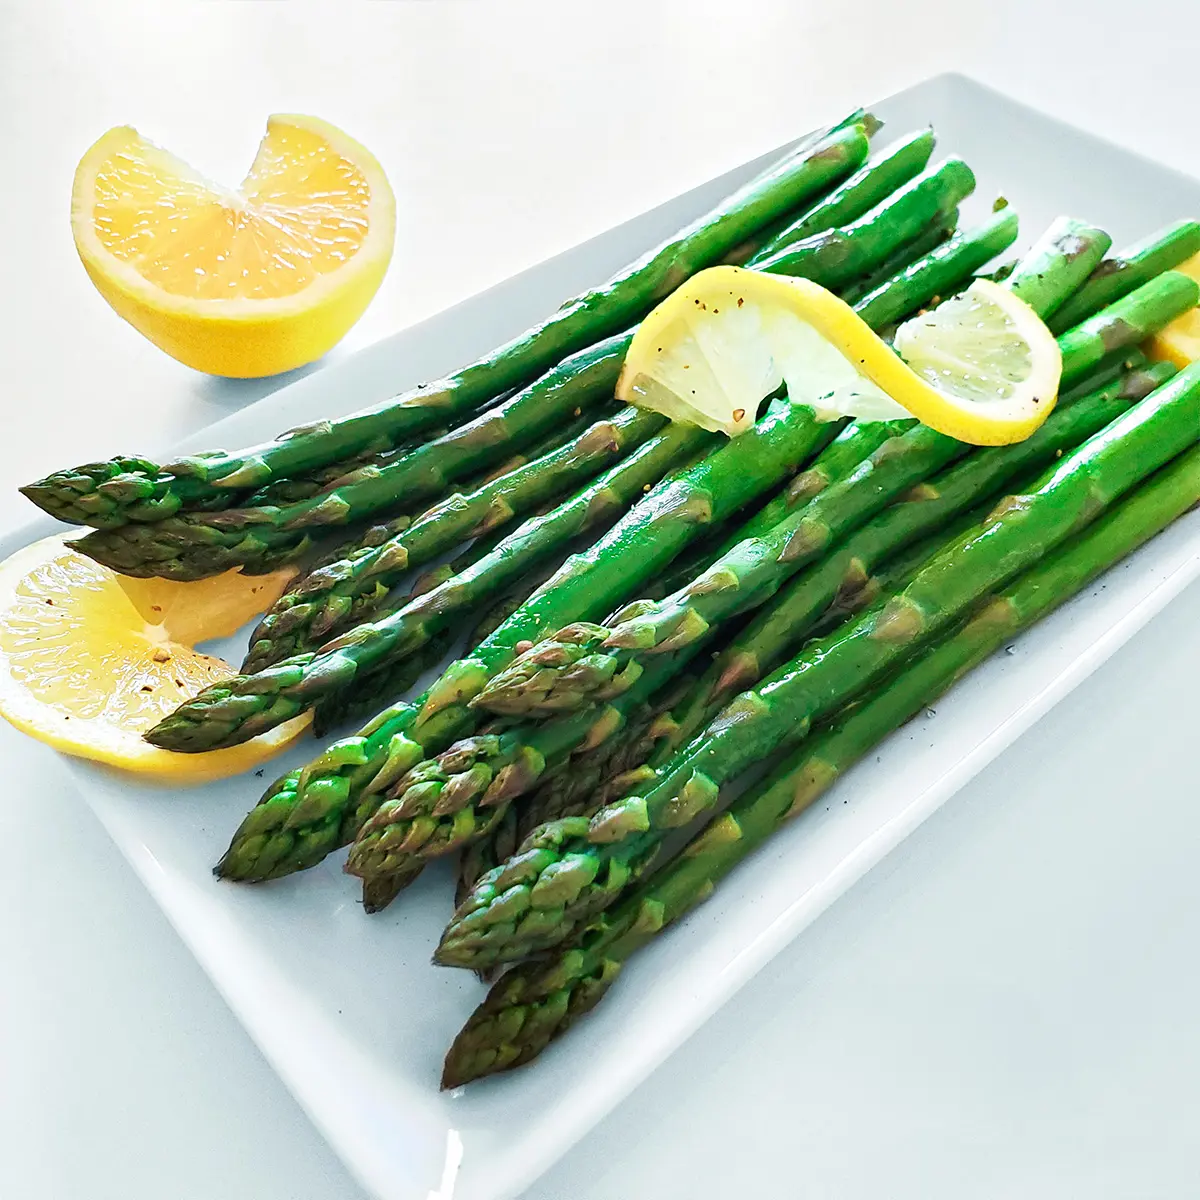 Oven grilled asparagus